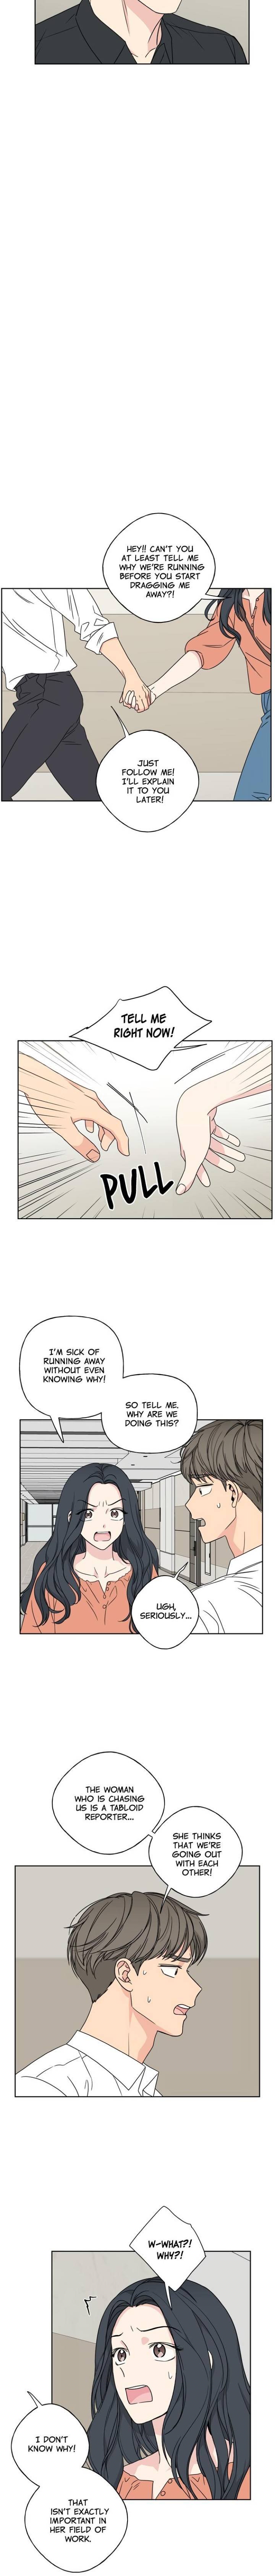 mother-im-sorry-chap-24-9